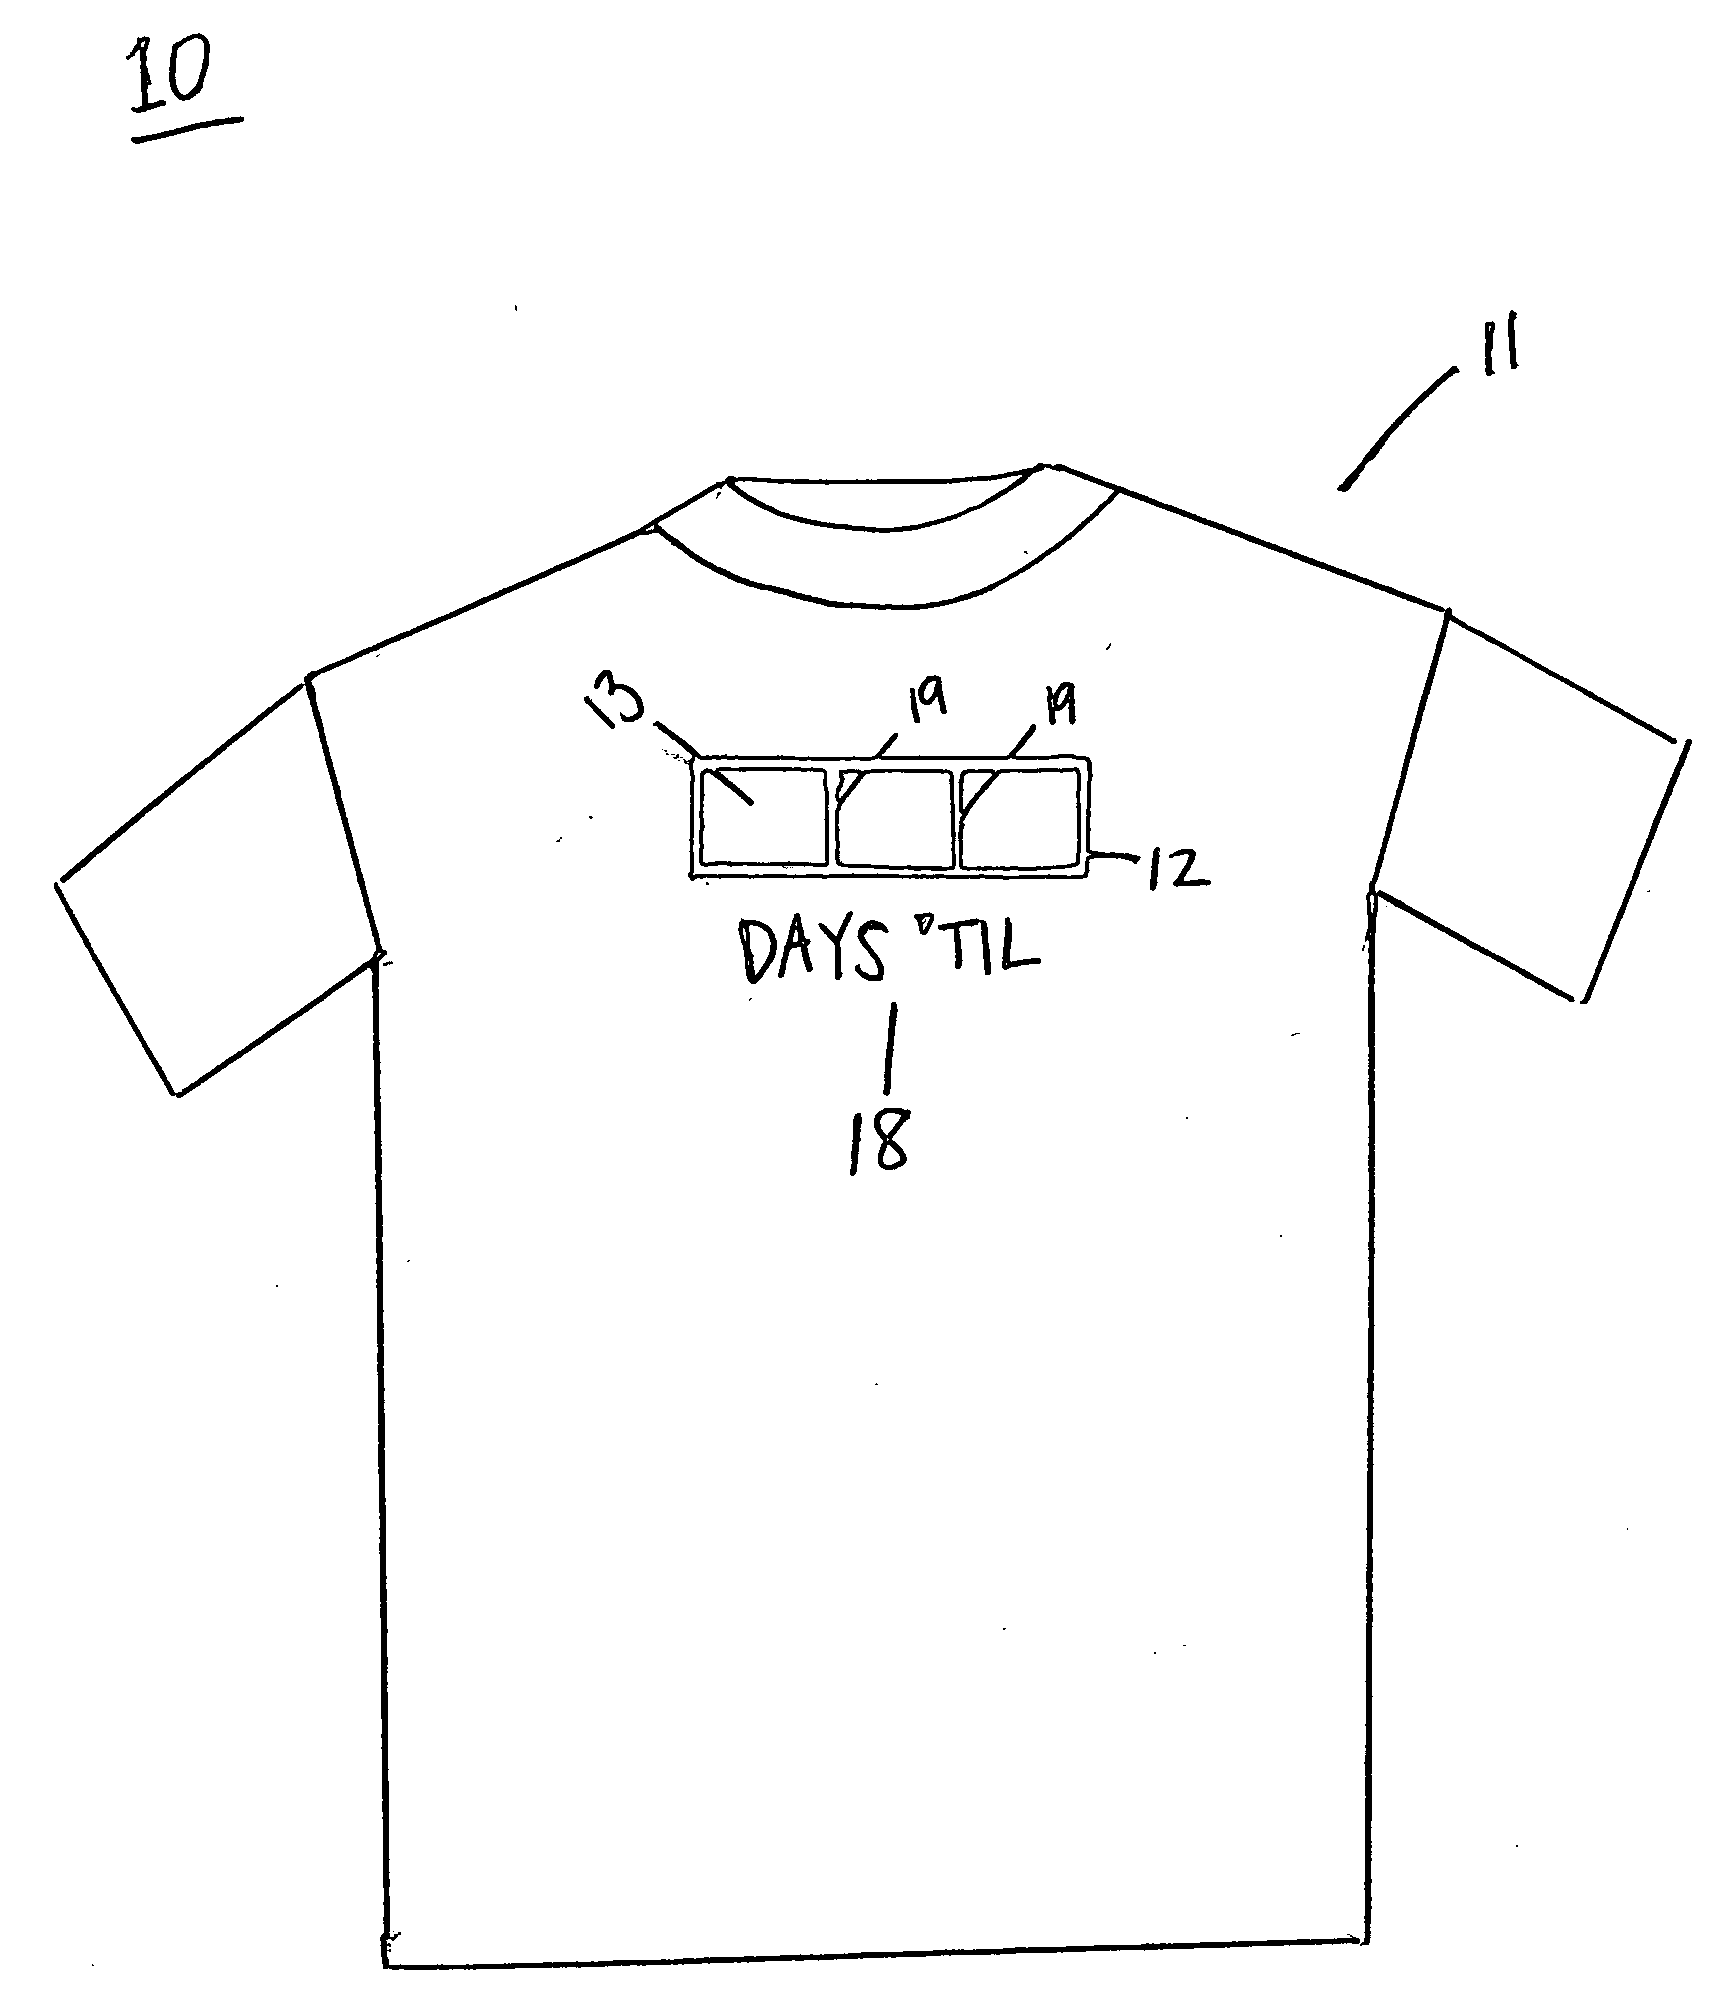 Garment with interchangeable indicia used to count